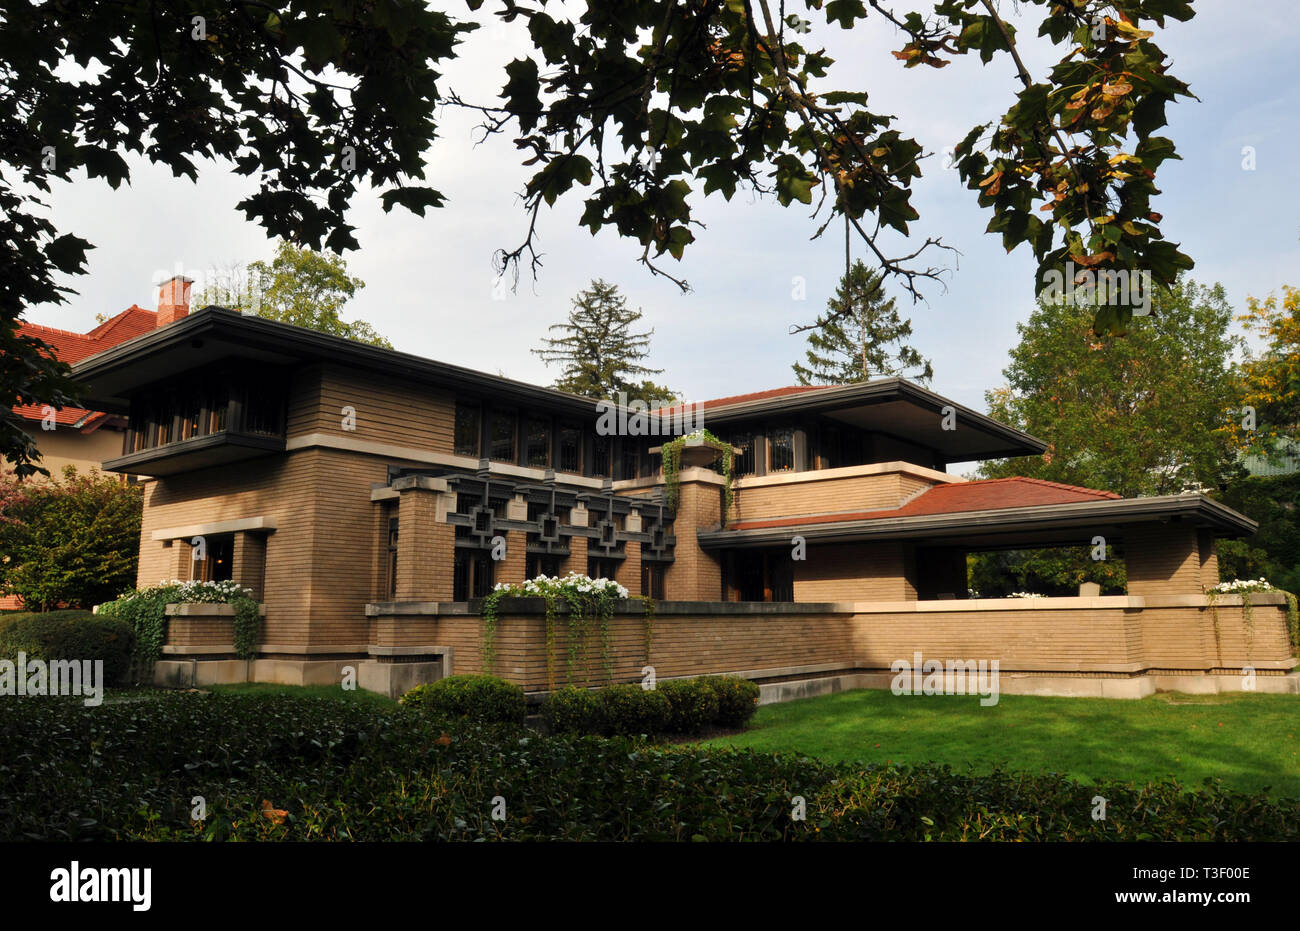 The Meyer May House in Grand Rapids, Michigan. The Prairie-style home, designed by architect Frank Lloyd Wright, was completed in 1909. Stock Photo